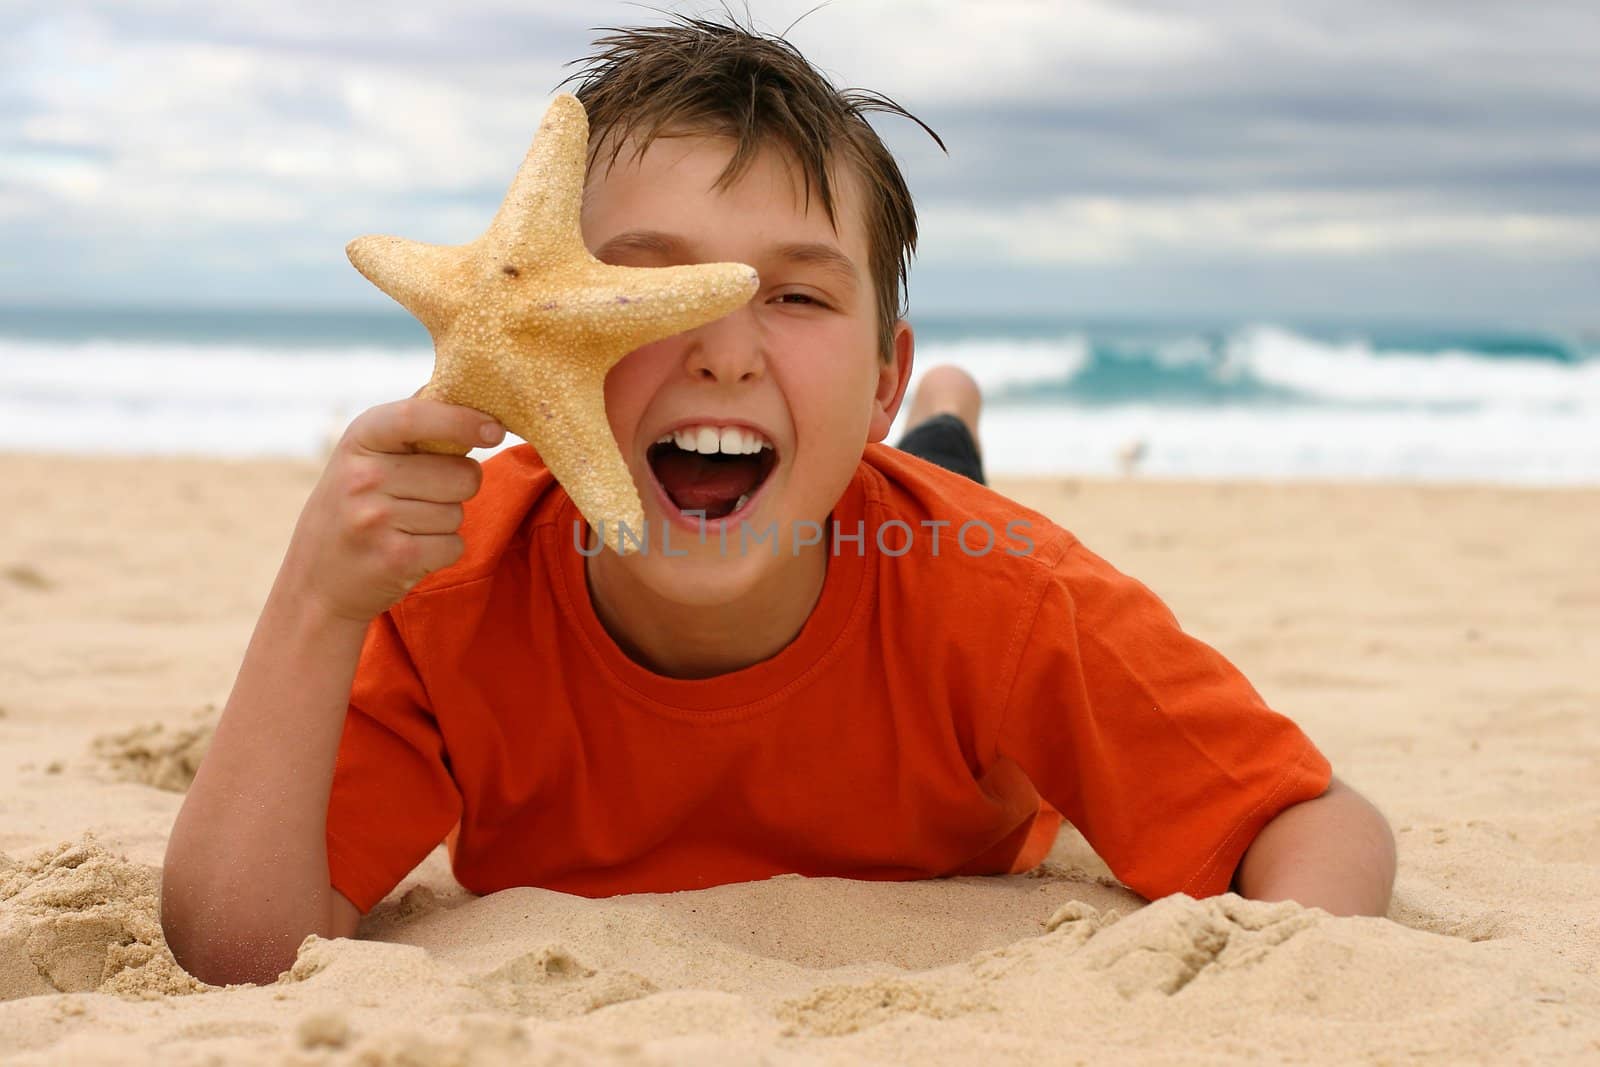 Laughing boy with starfish on the beach by lovleah